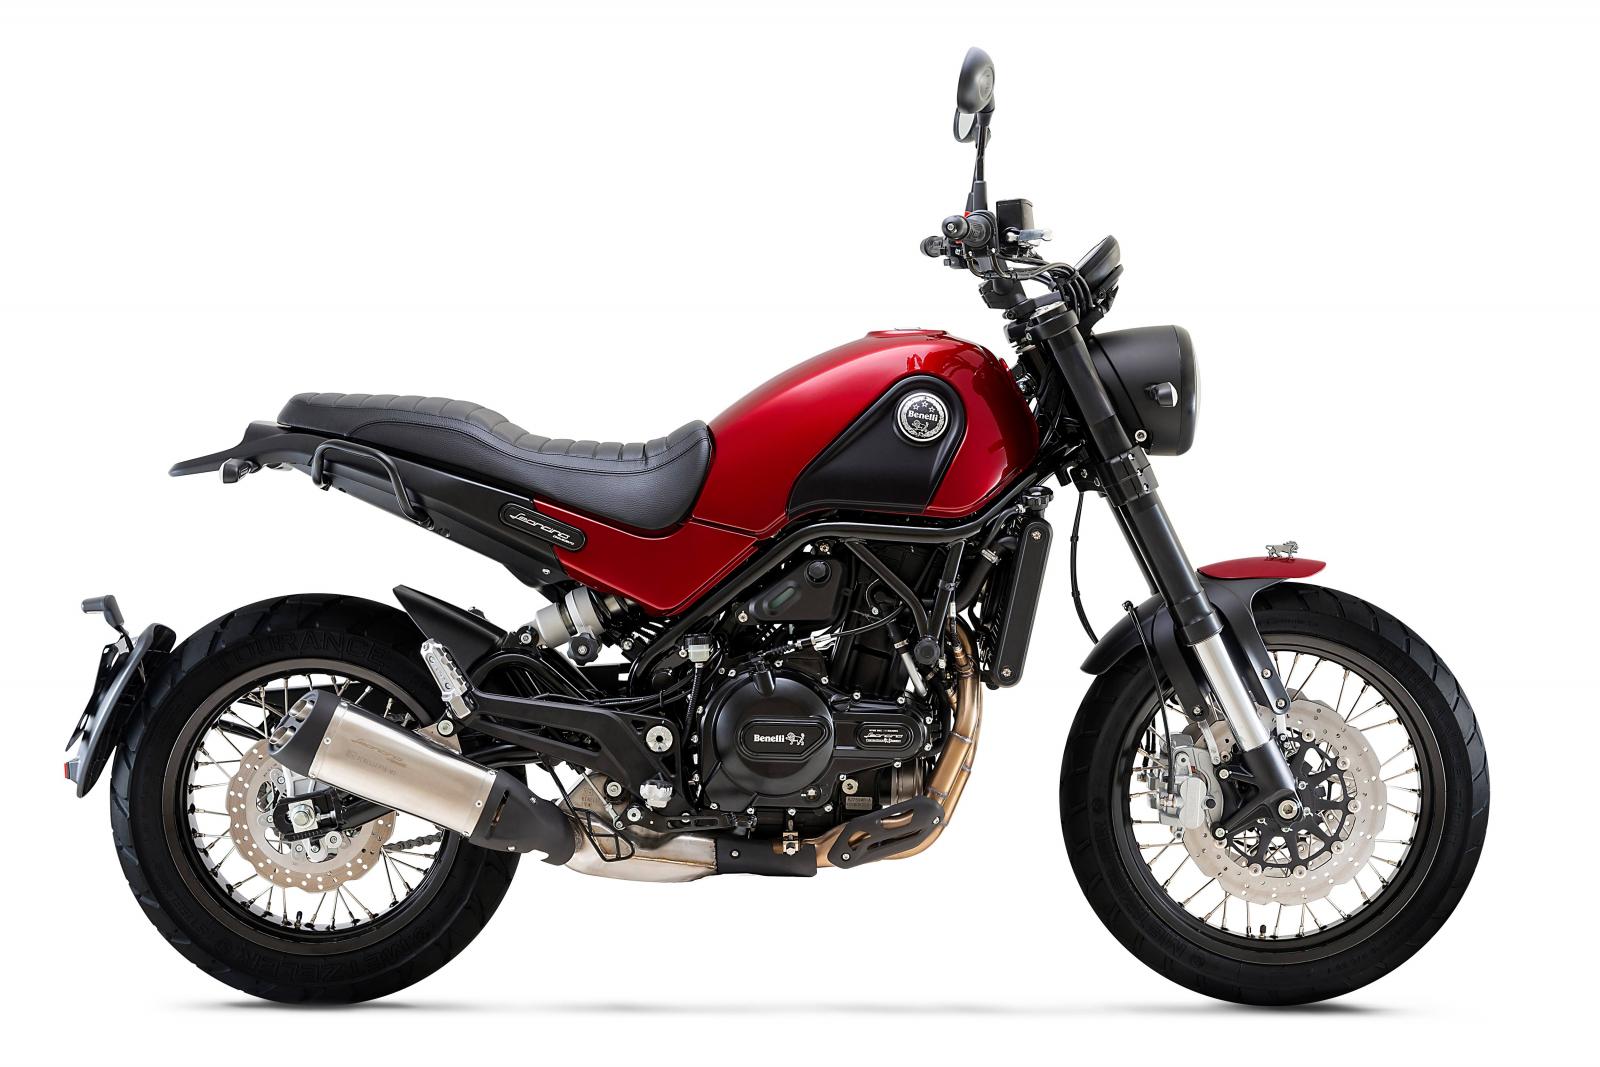 INR 4.75 lakh 2021 Benelli Leoncino 500 Trail introduced in the USA